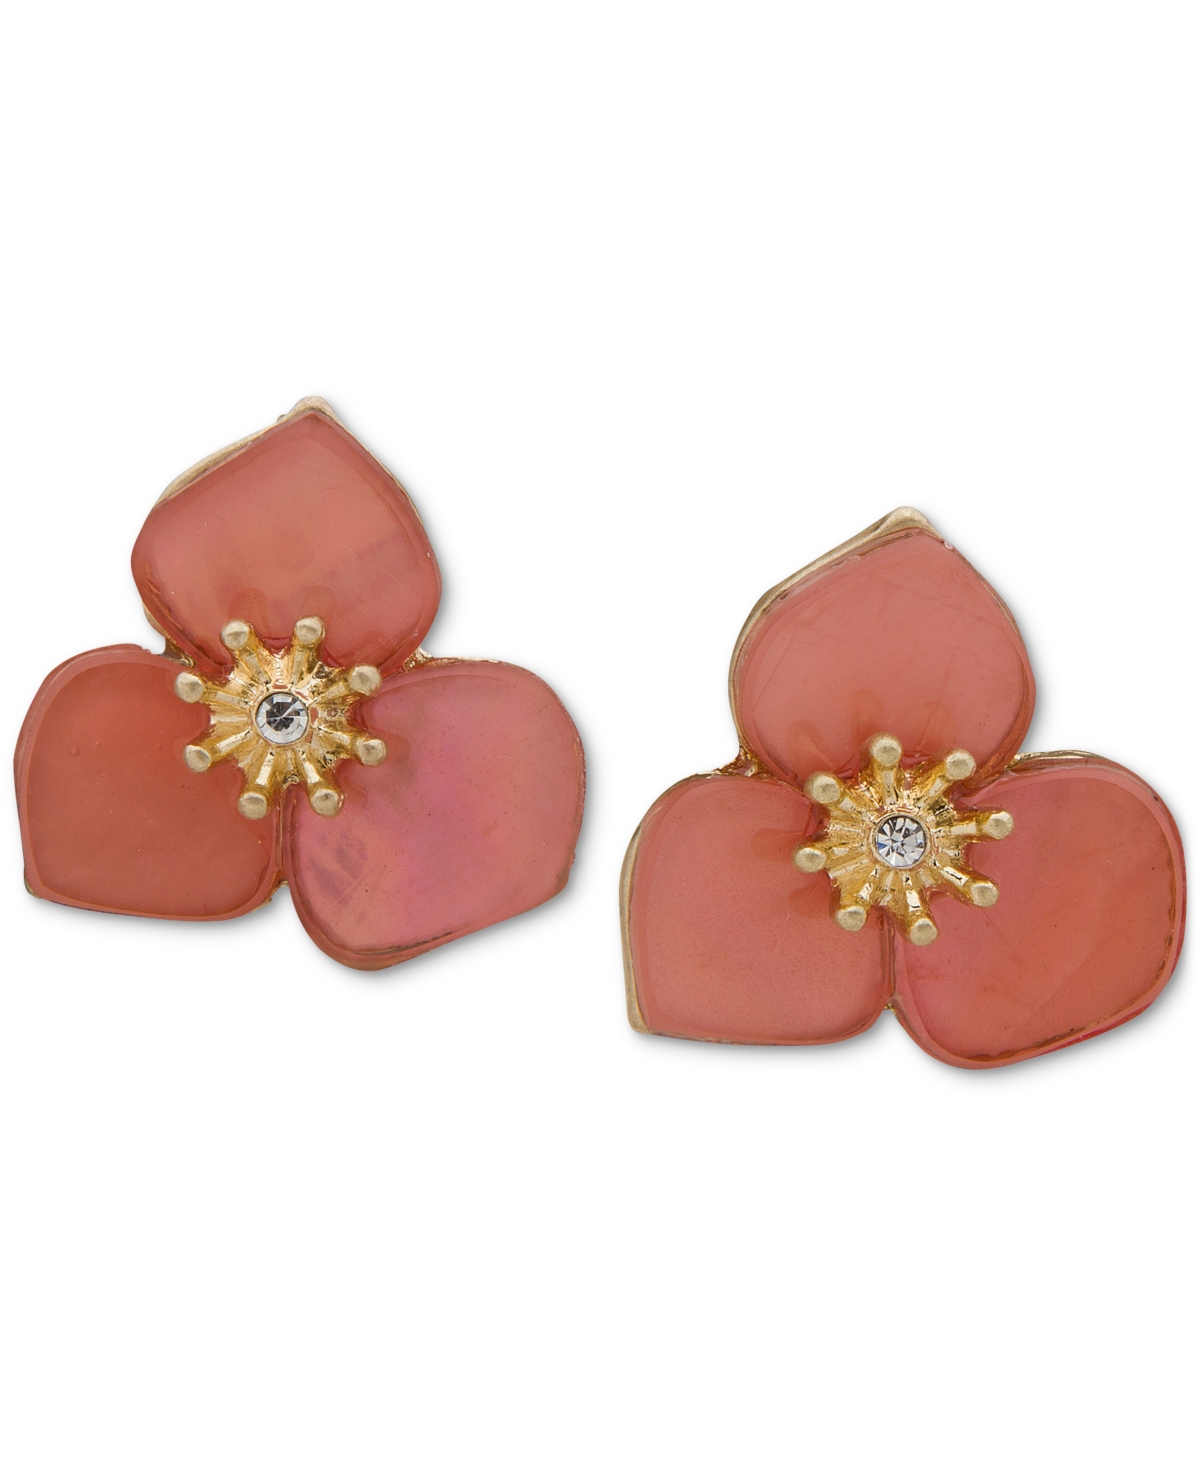 Gold-Tone Pave Color Flower Button Earrings - Pink